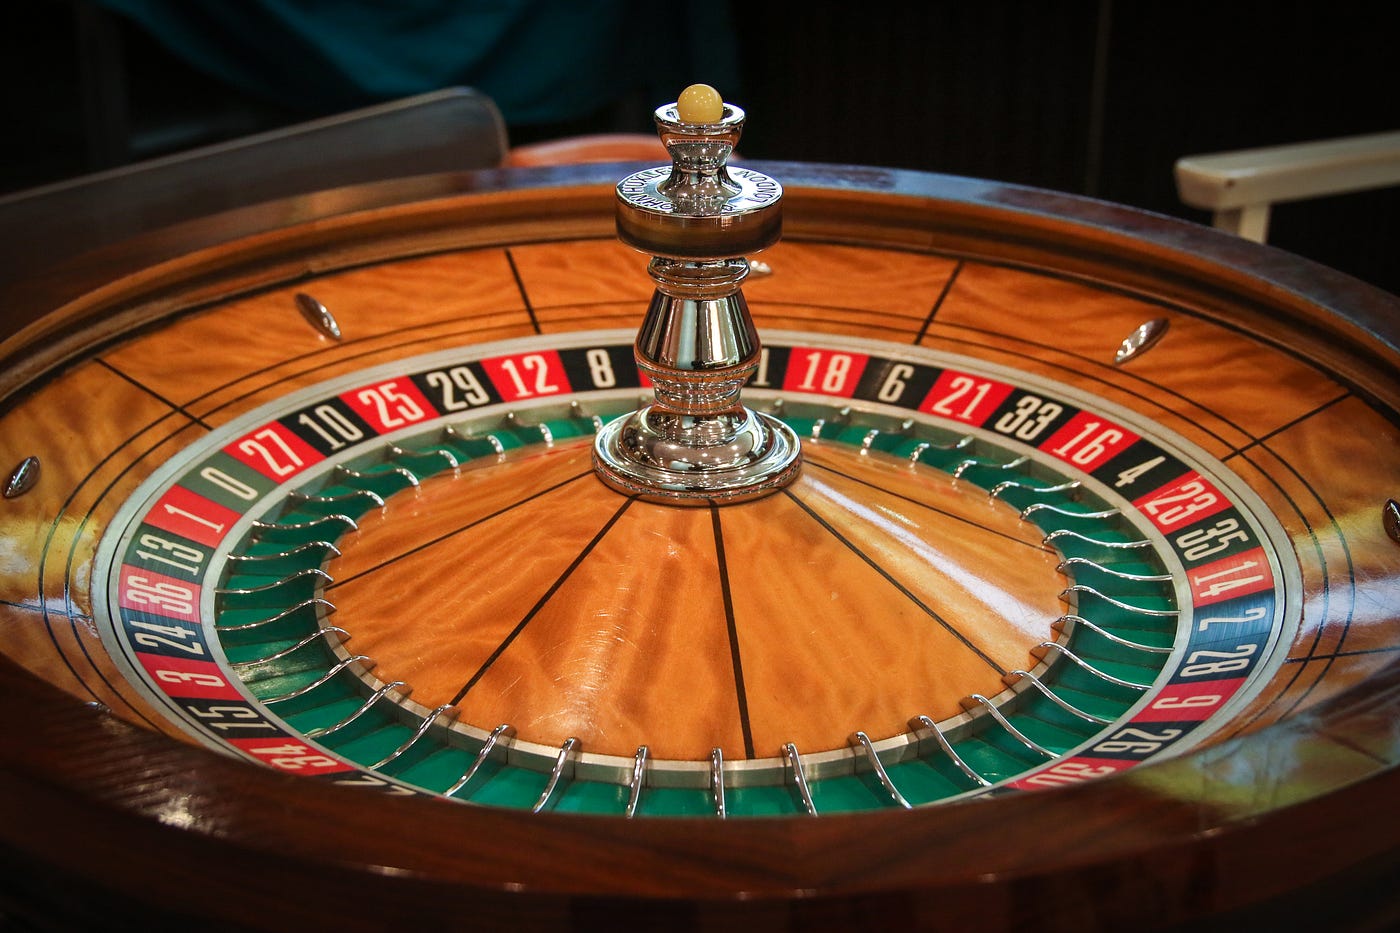 What do you call the casino employee who operates the roulette